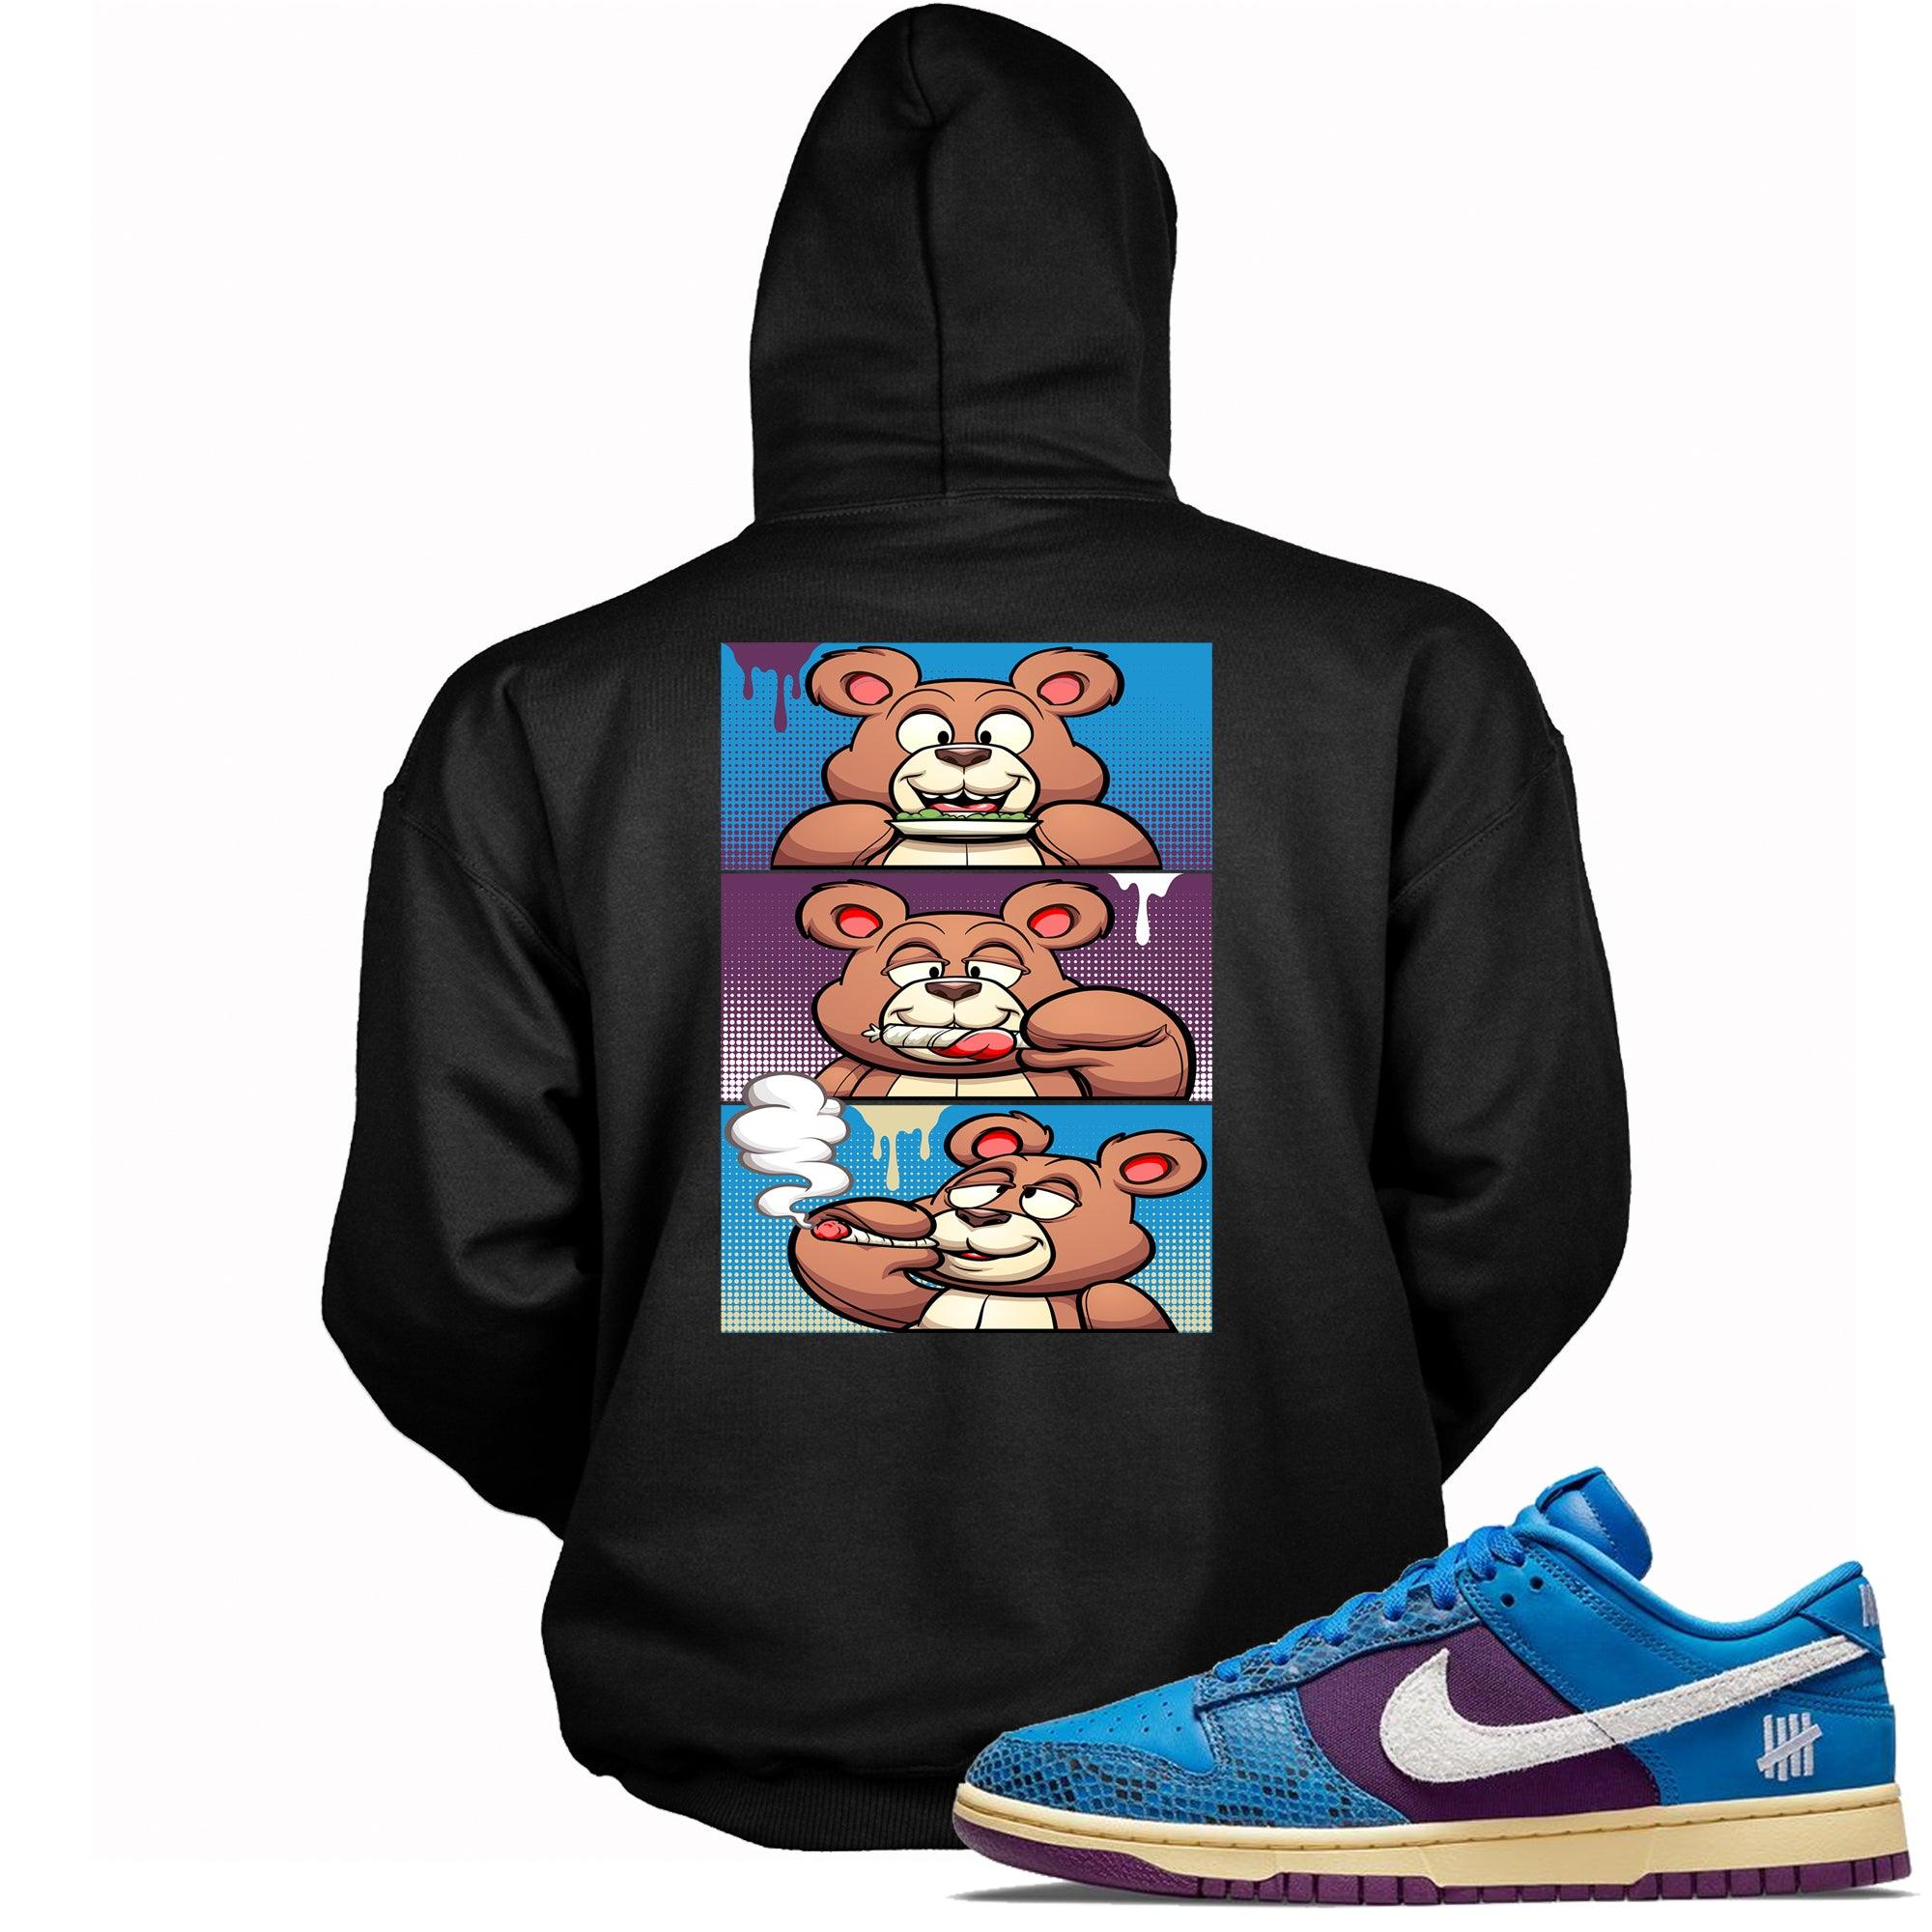 Roll It Hoodie Nike Dunk Low Undefeated 5 On It Dunk vs AF1 Sneakers photo